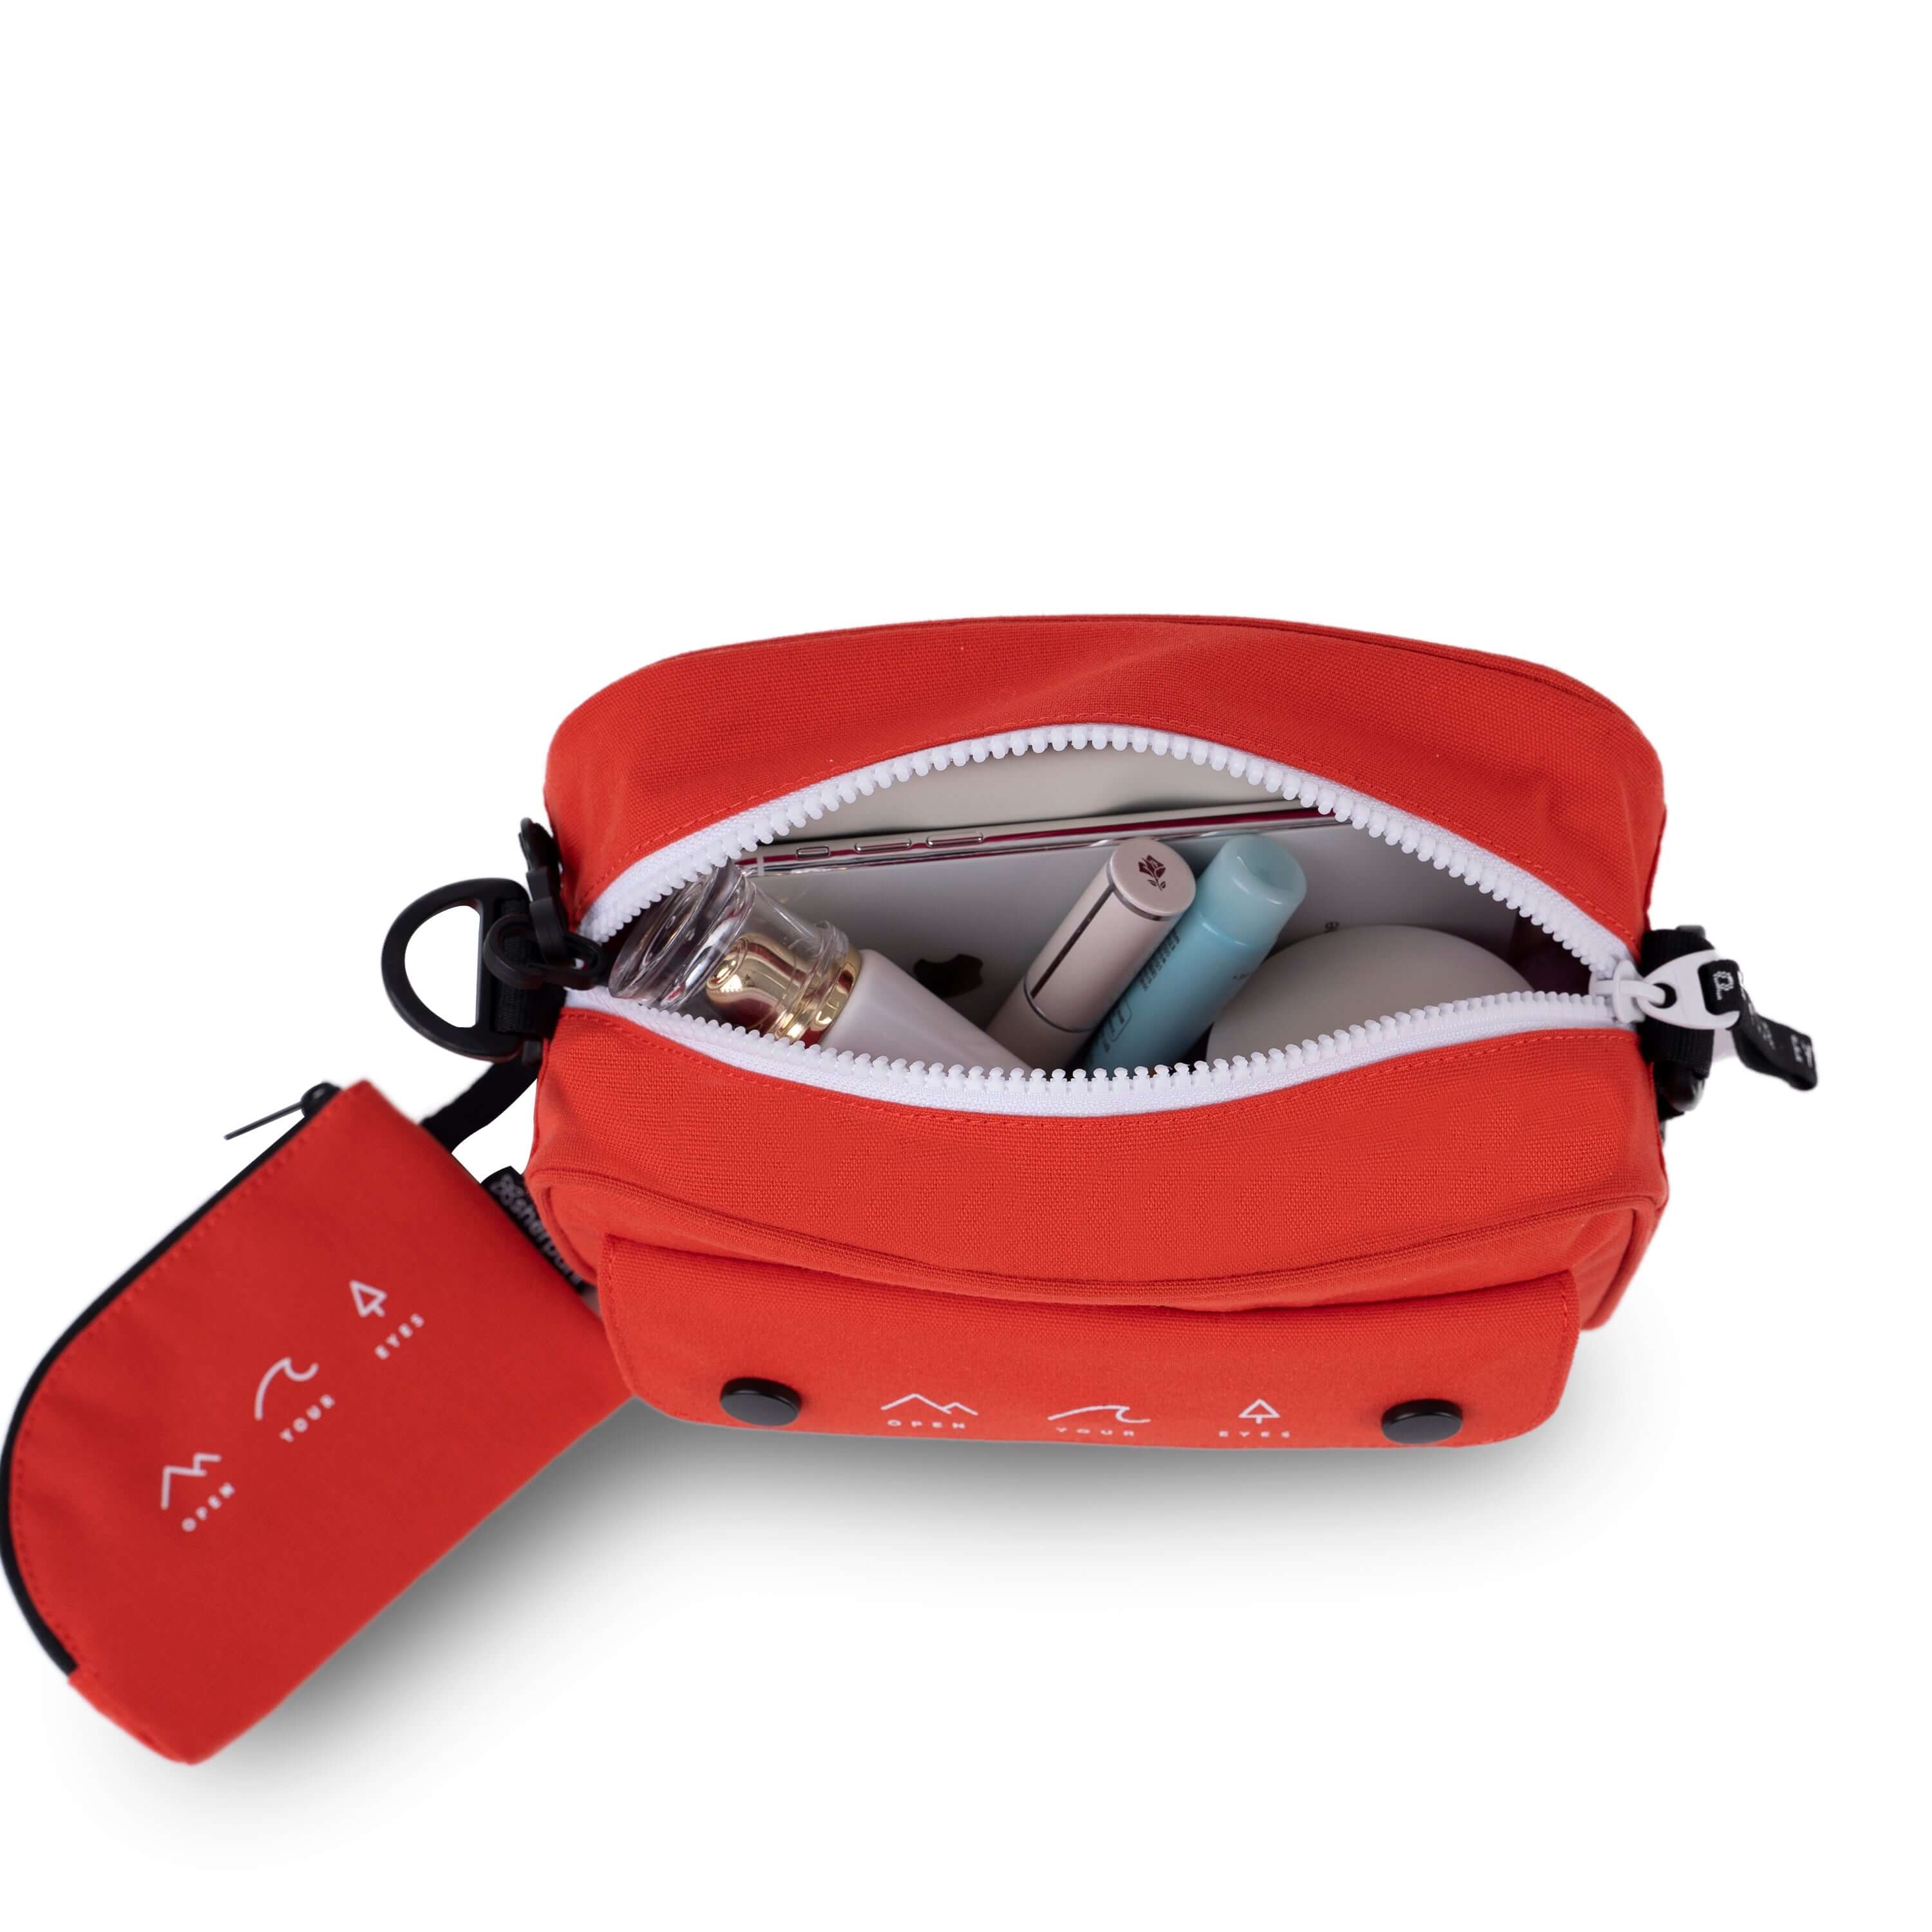 Top view of Sherpani crossbody, the Osaka in Poppy, with matching detachable coin purse. The bag is unzipped to reveal a hot pink interior. It is full of example items.